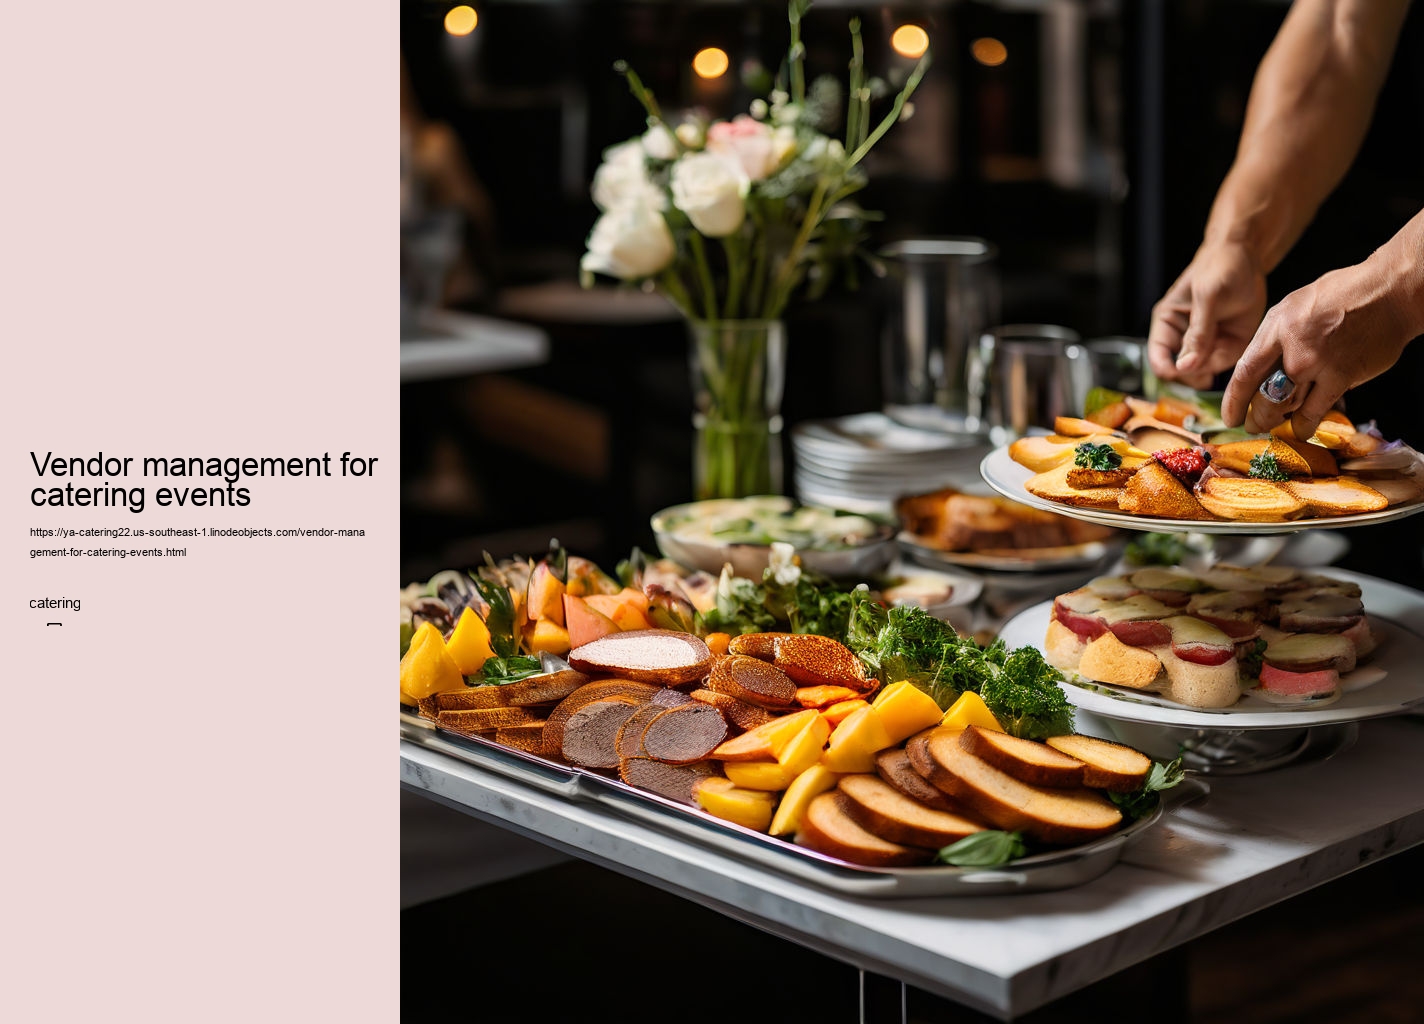 Vendor management for catering events